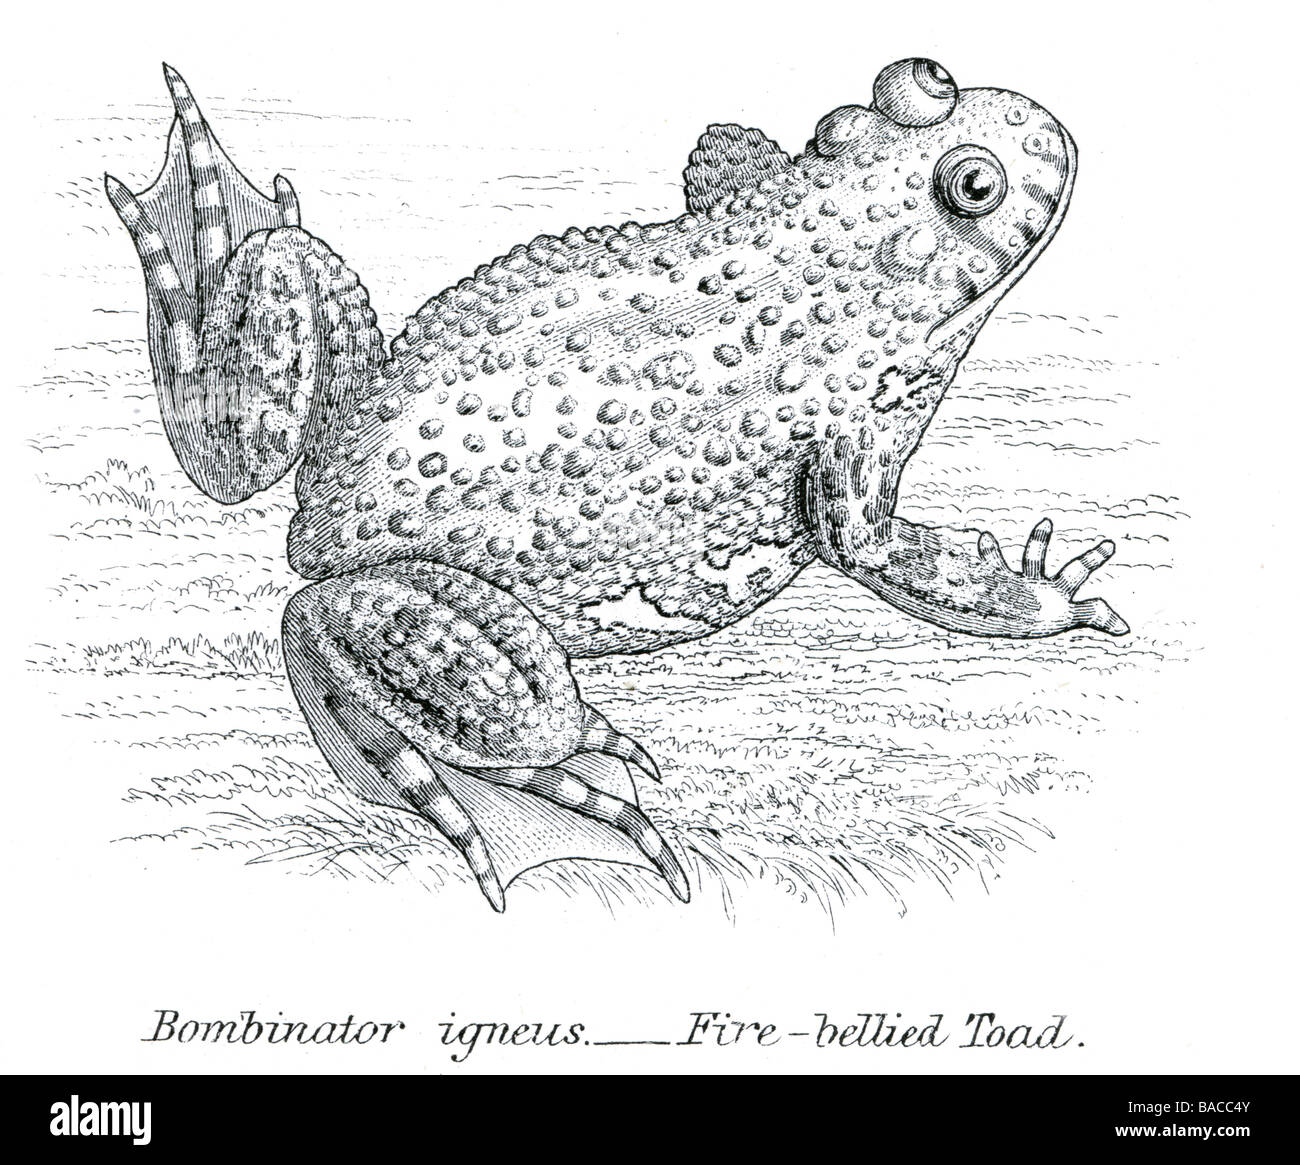 bombinator igneus fire bellied toad firebelly toads species Bombina 'firebellied Amphibia Stock Photo